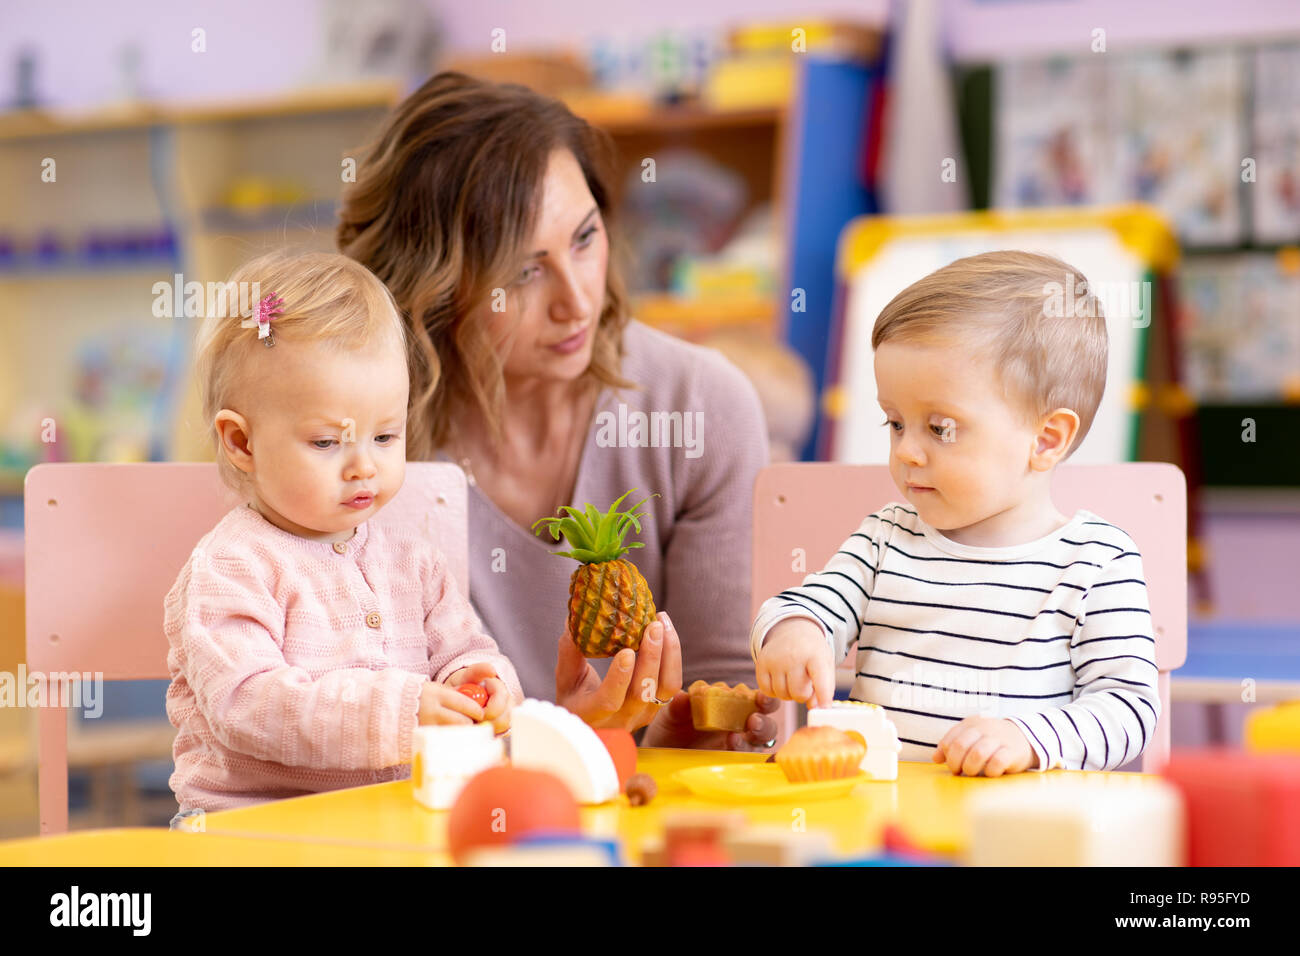 Preschool teacher with babies toddlers playing with colorful toys at kindergarten Stock Photo